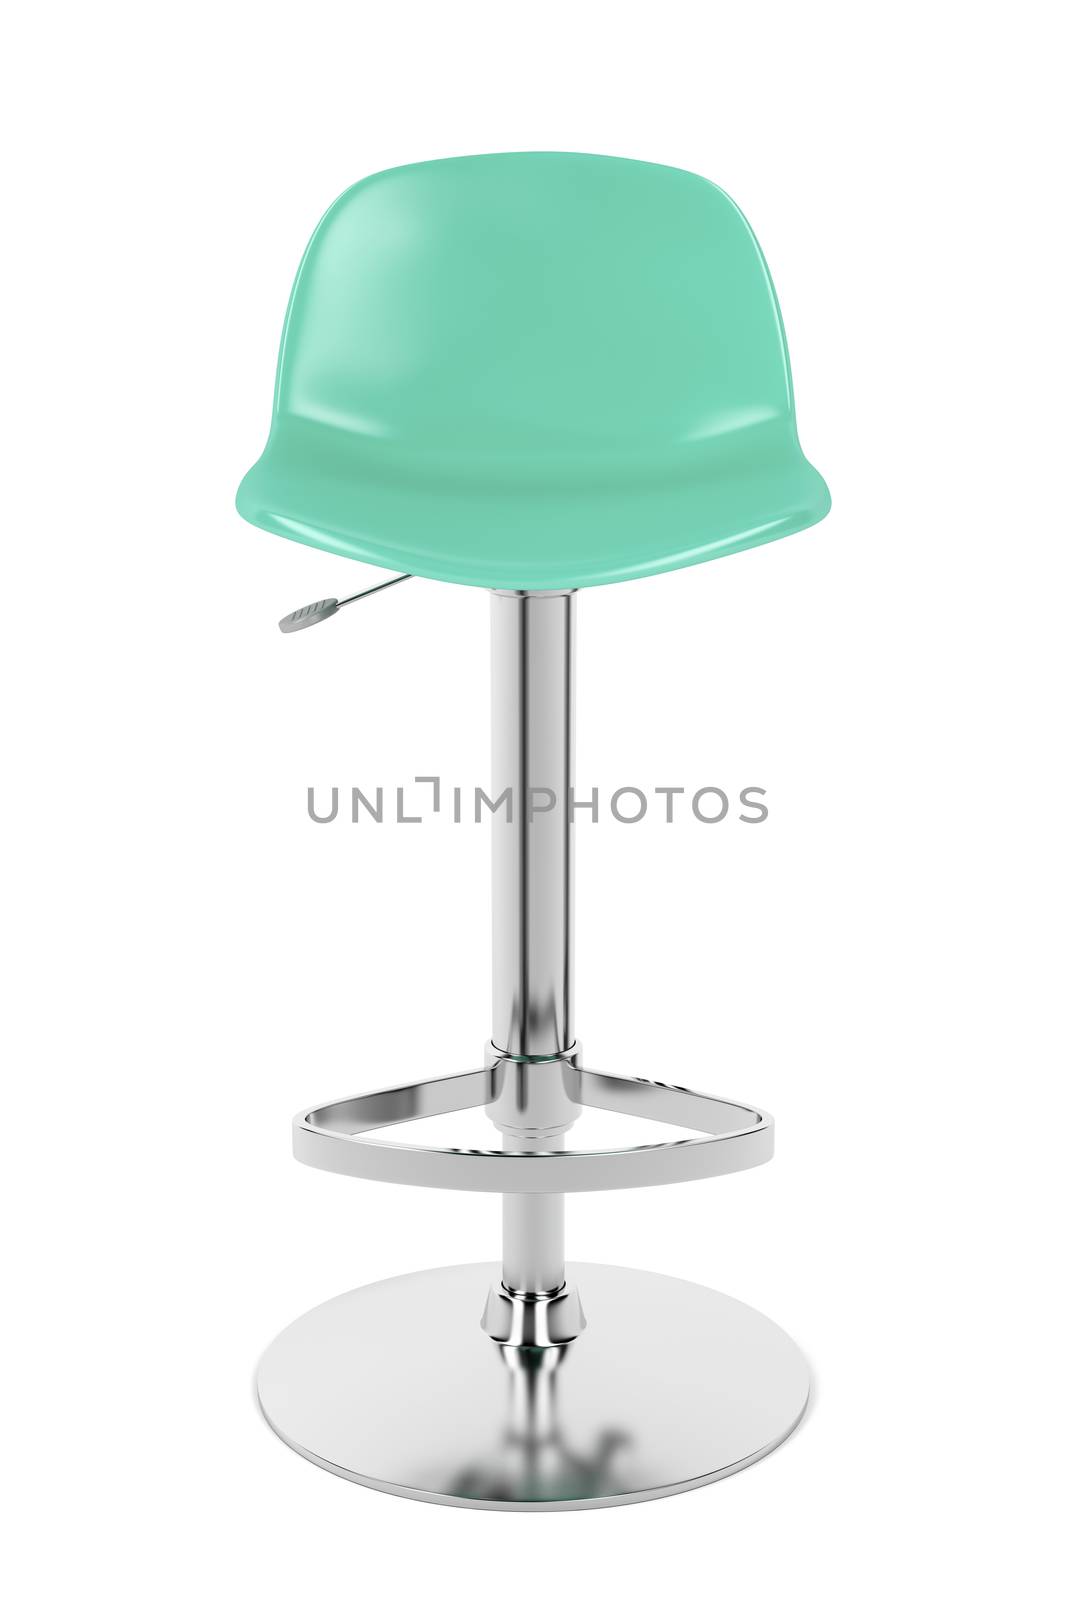 Front view of bar stool by magraphics